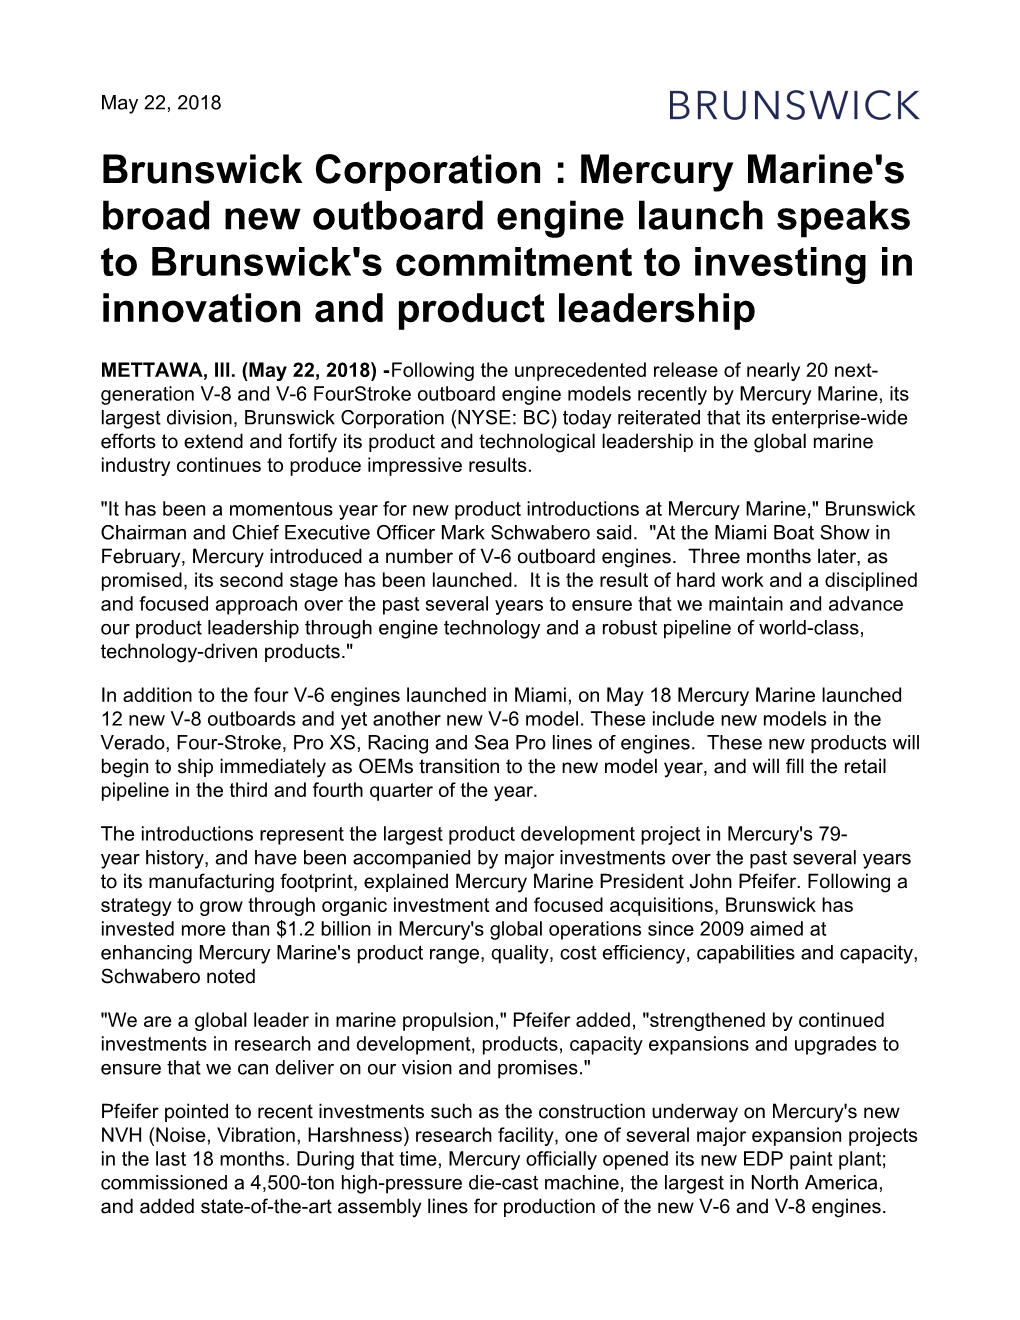 Brunswick Corporation : Mercury Marine's Broad New Outboard Engine Launch Speaks to Brunswick's Commitment to Investing in Innovation and Product Leadership